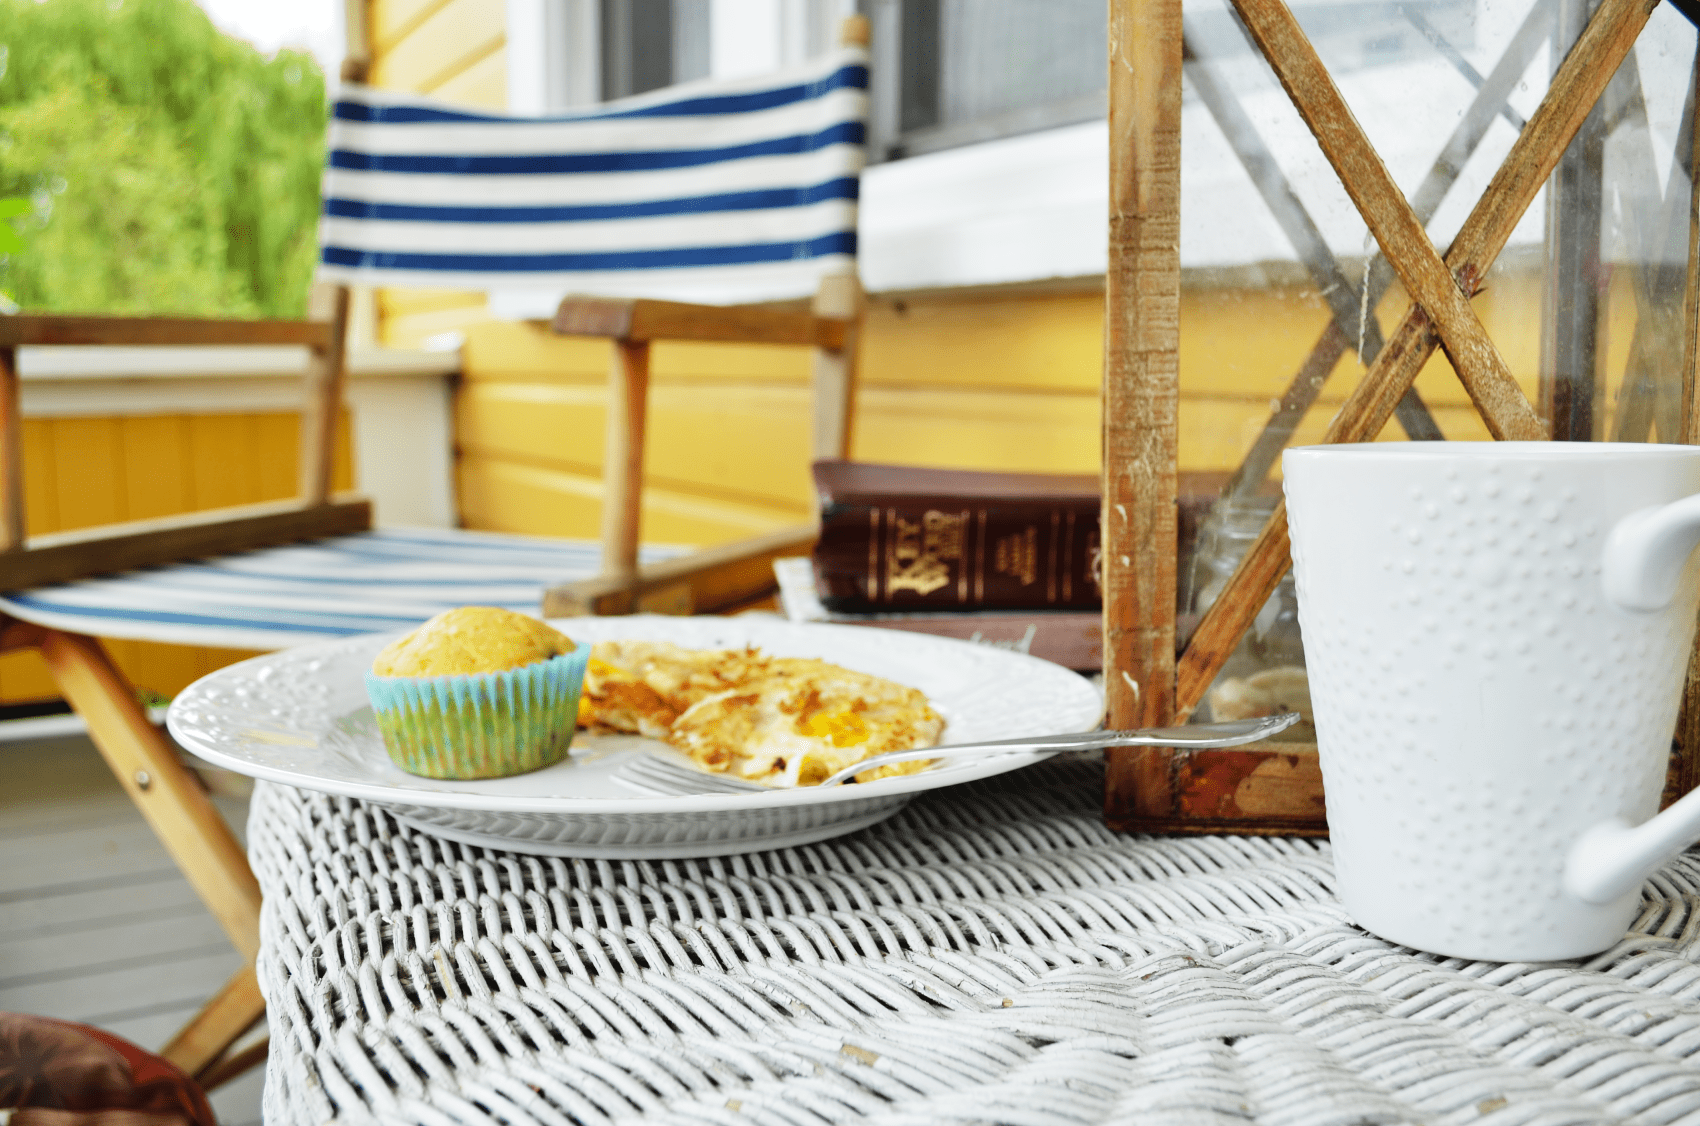 A Deep Red Bible sits on a wicker porch table with a plate of breakfast.